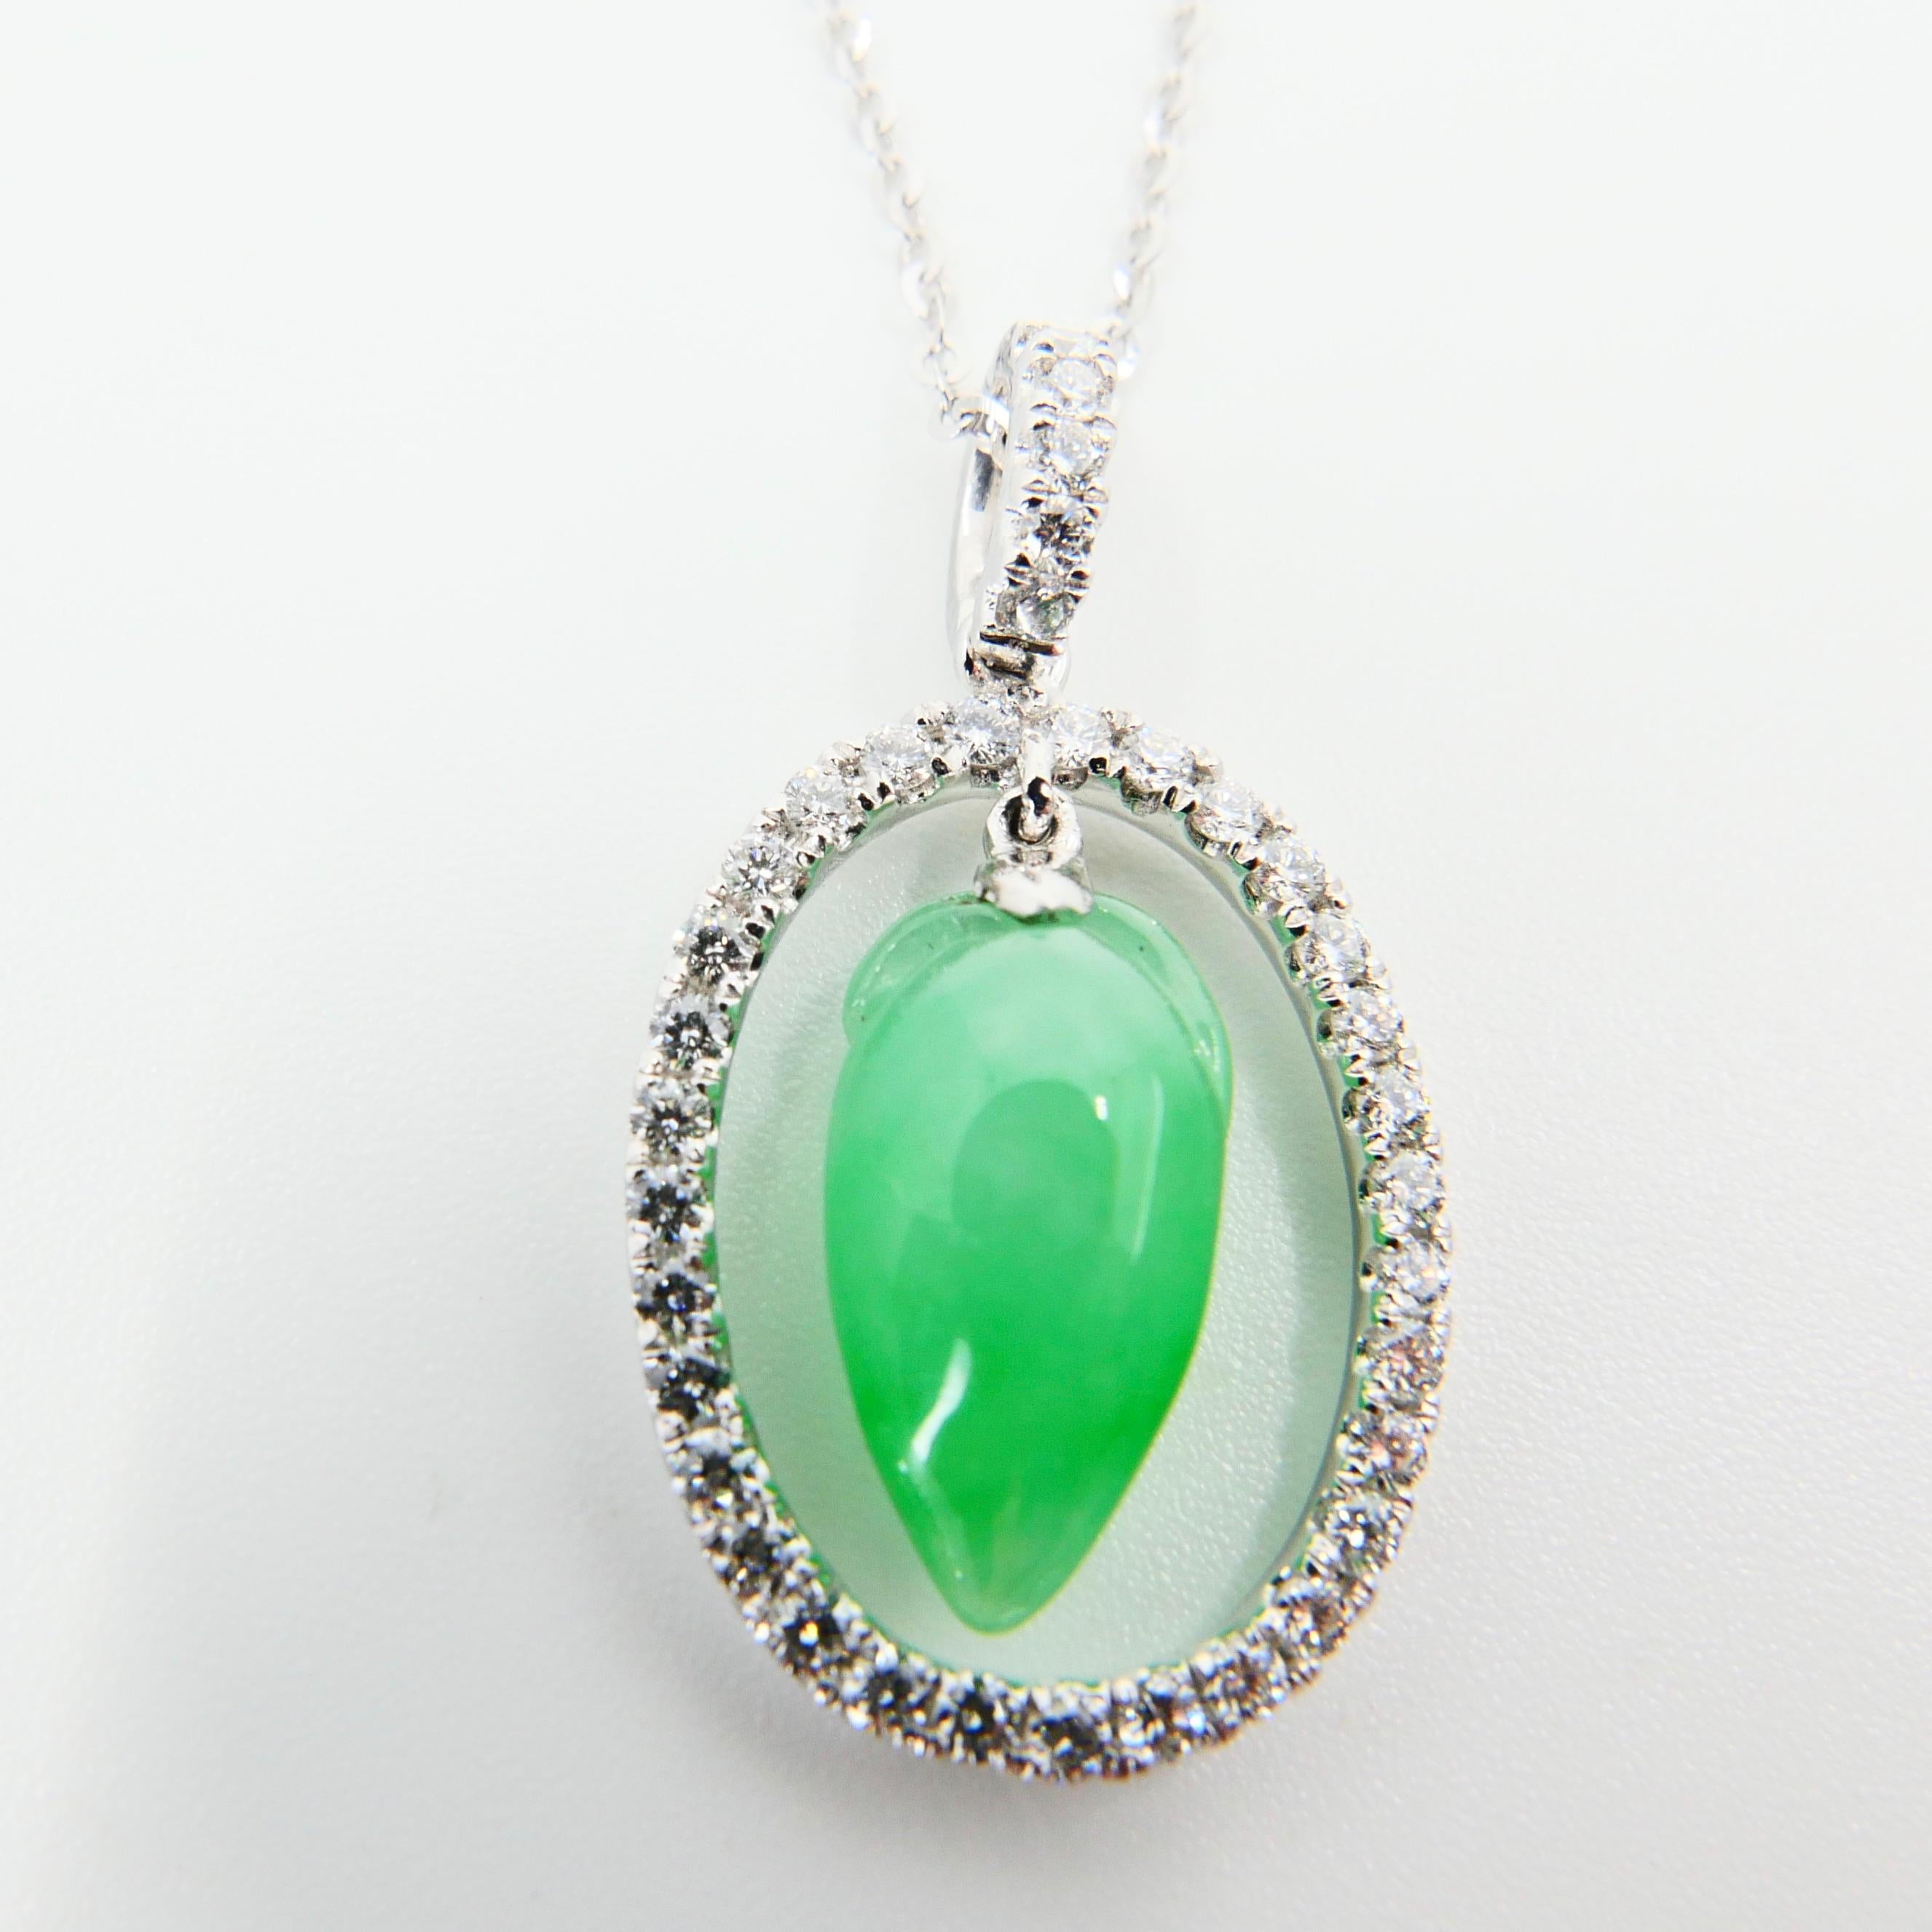 Certified Type A Icy Jade & Diamond Pendant, Apple Green Color, Translucent For Sale 1